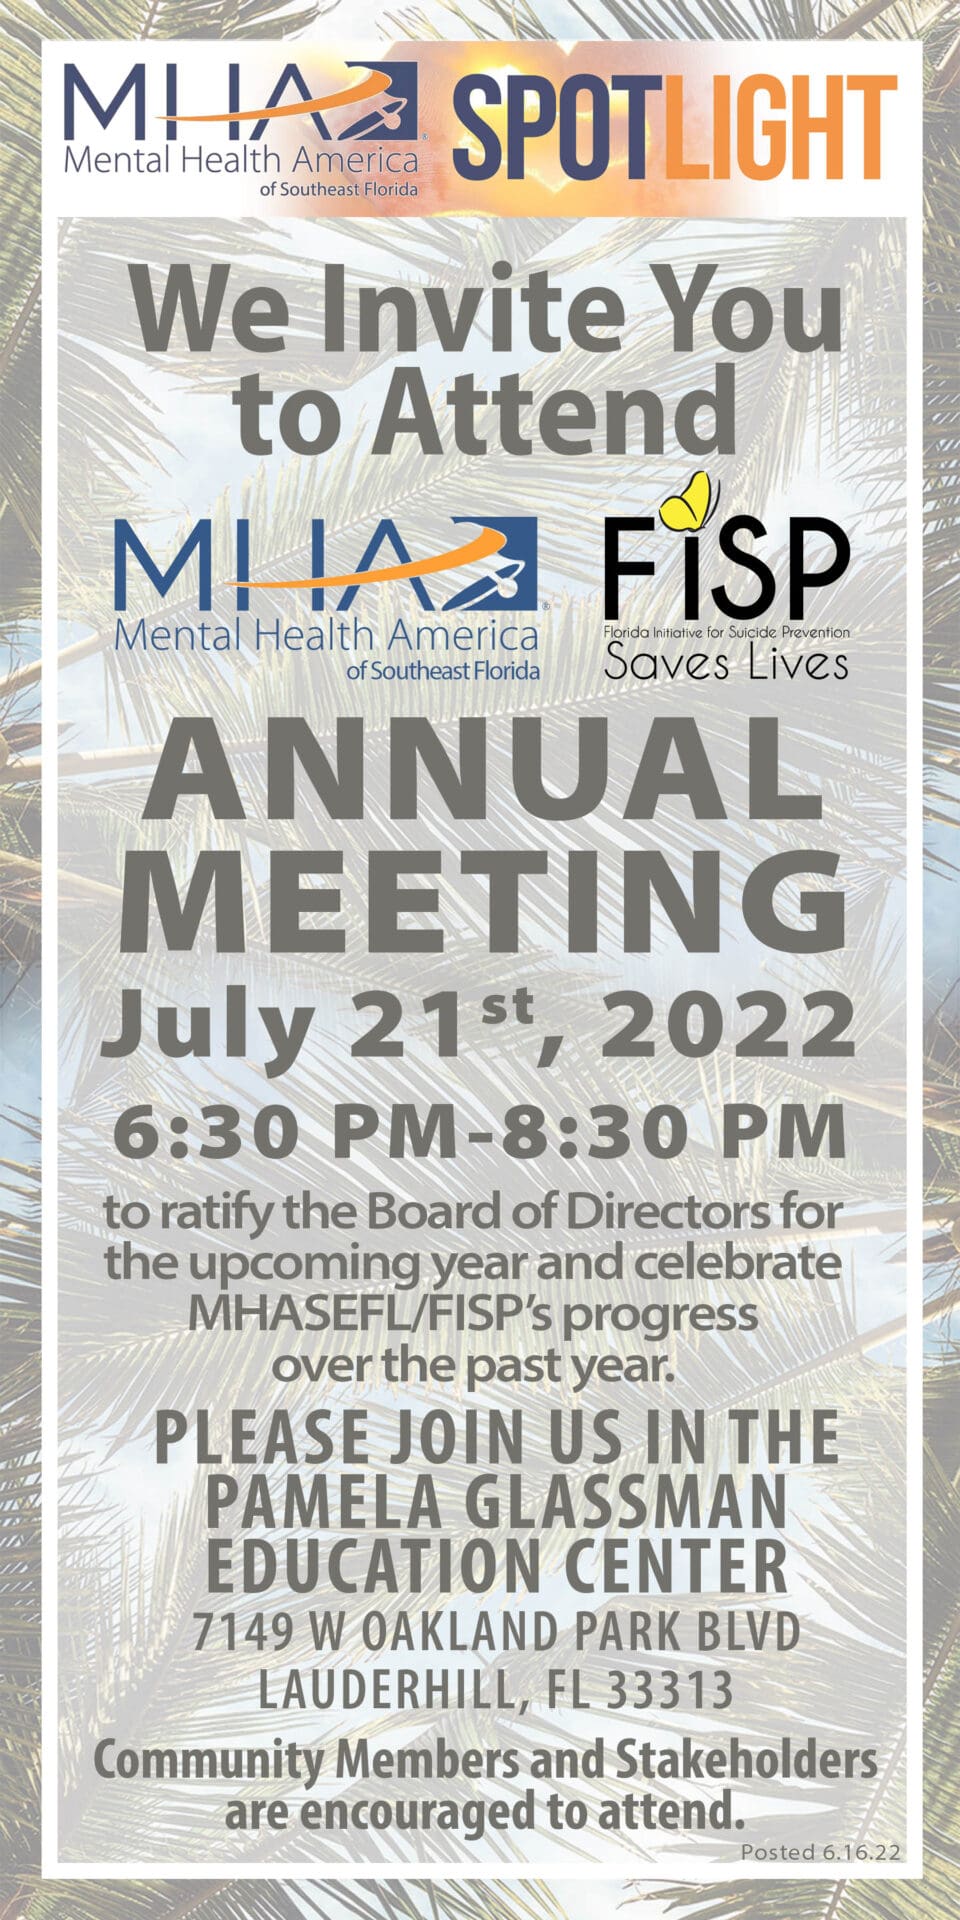 A poster for the annual meeting of mihaz and fisp.